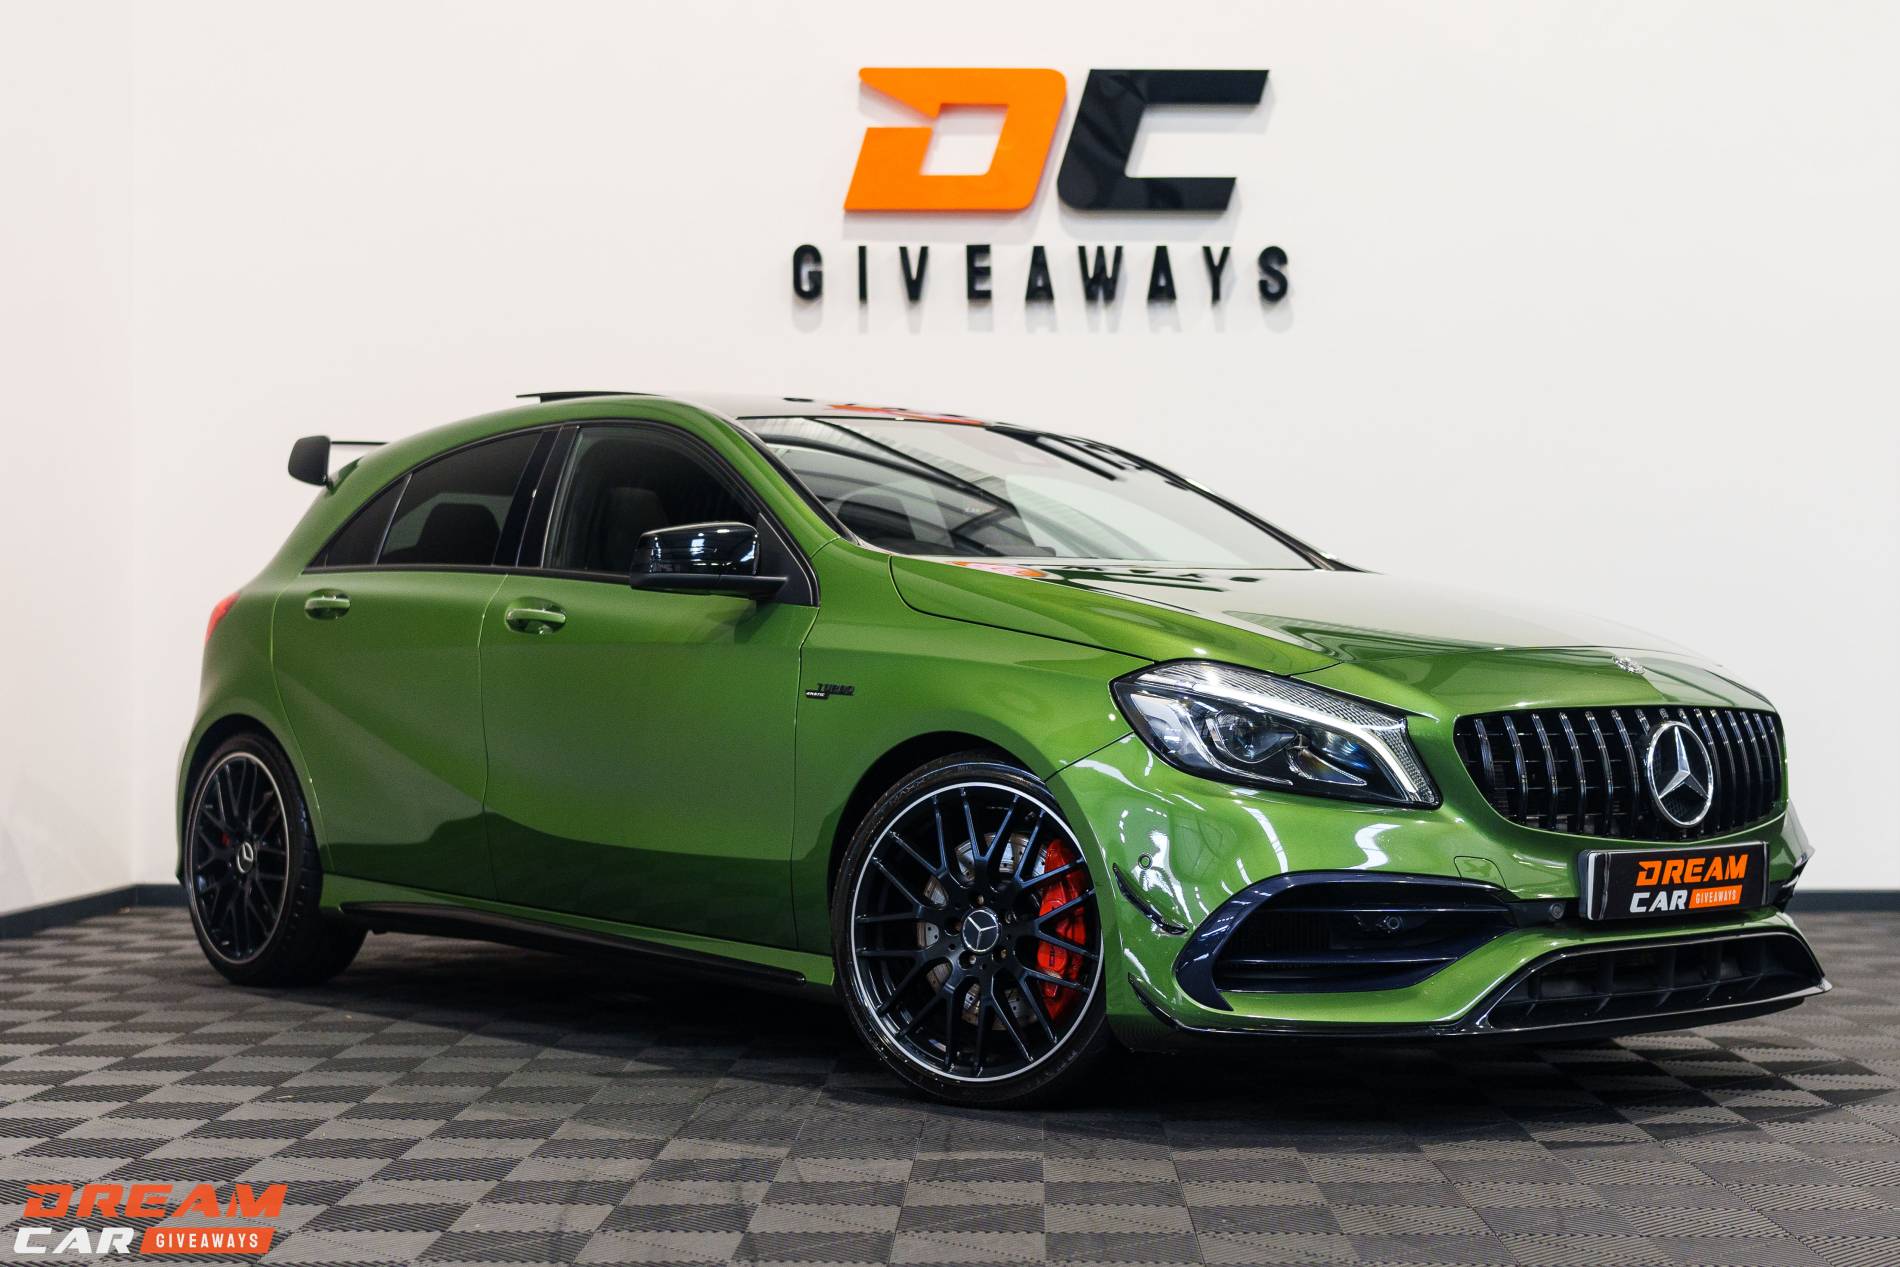 Win This Mercedes-Benz A45 AMG or £18,000 Tax Free - Only 999 Entries